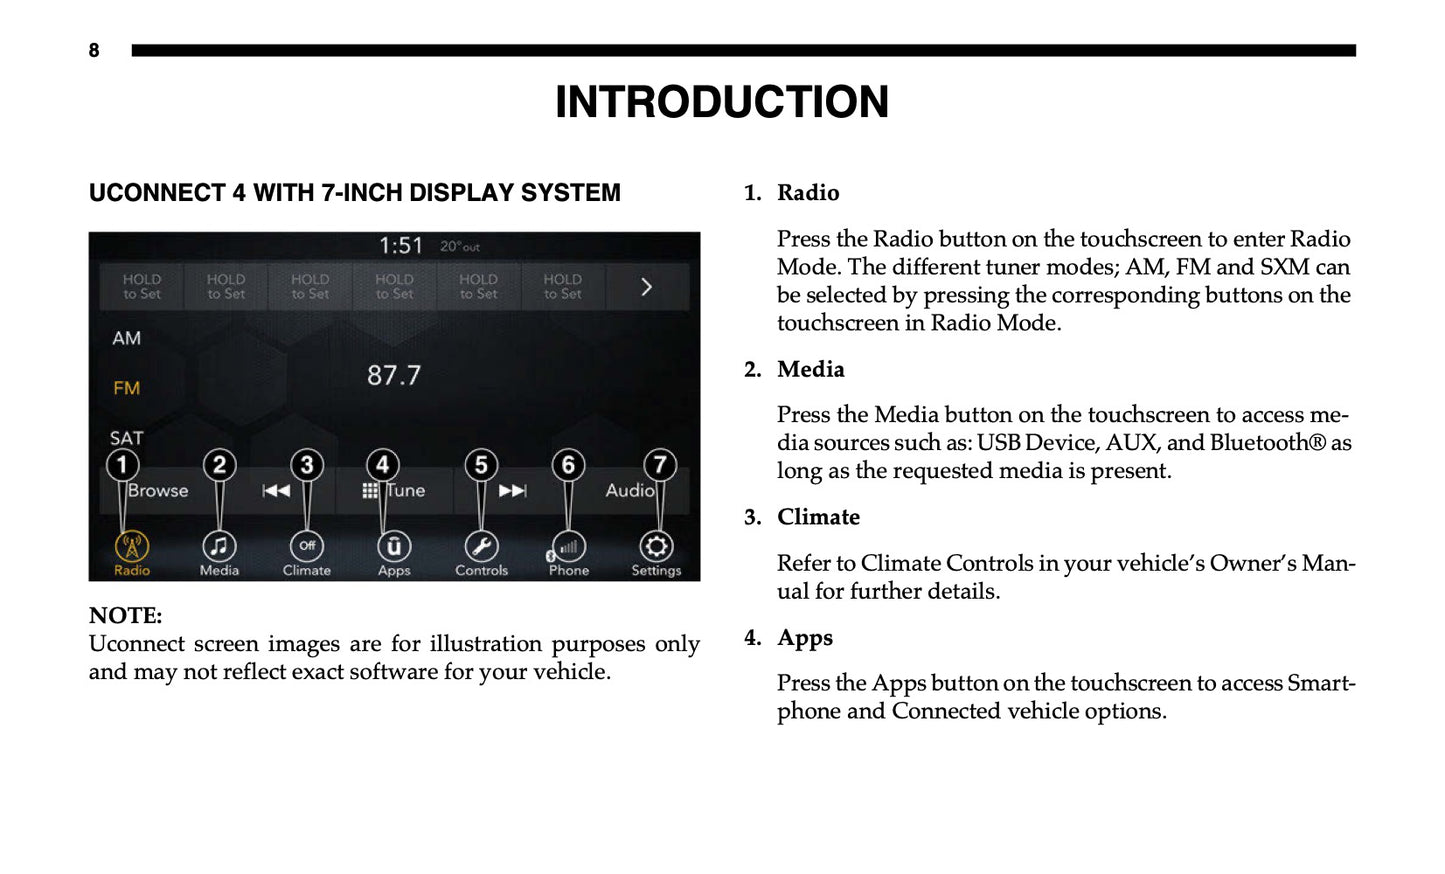 Uconnect 4 With 7-Inch Display Owner's Manual